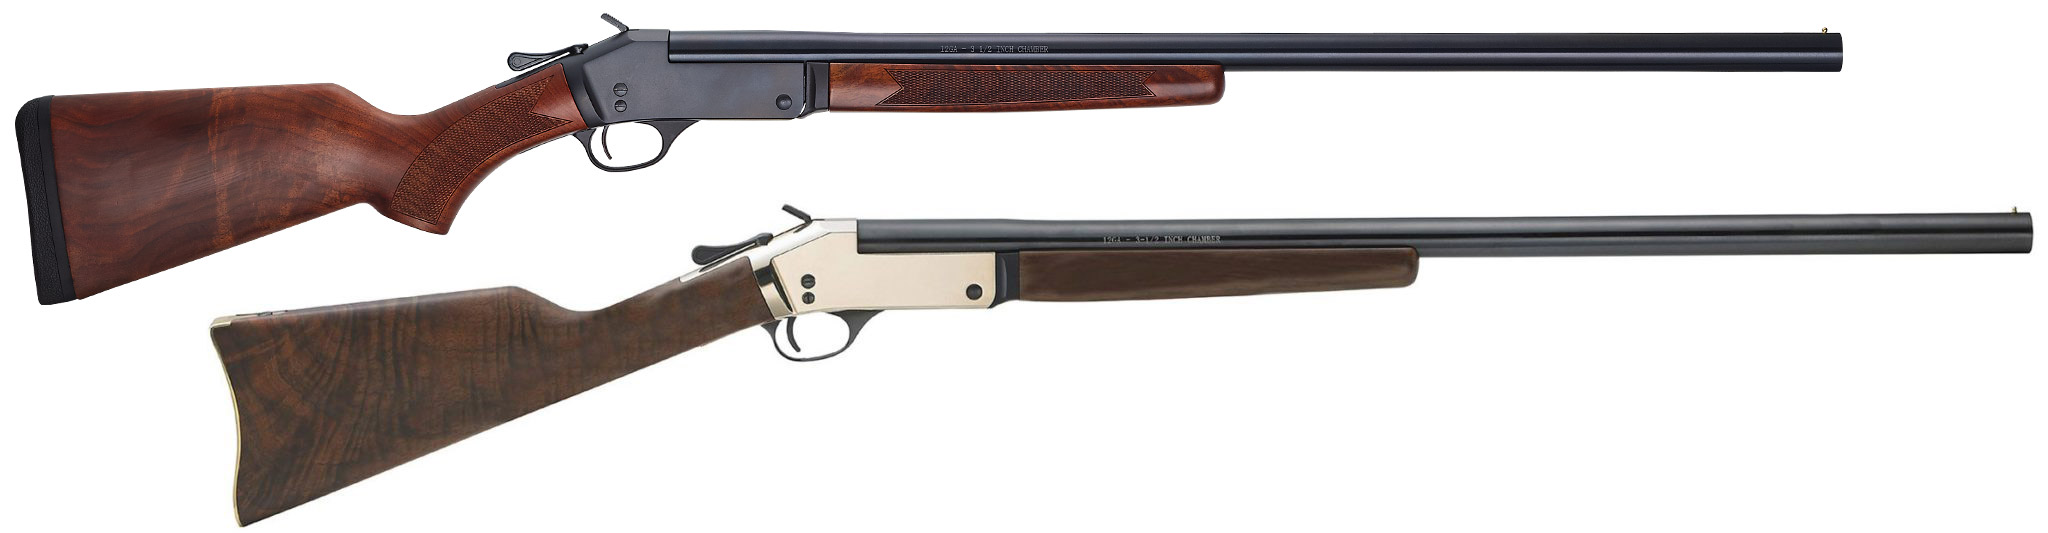 Henry is known for its lever-action rifles, but make a fine single-shot shotgun as well.